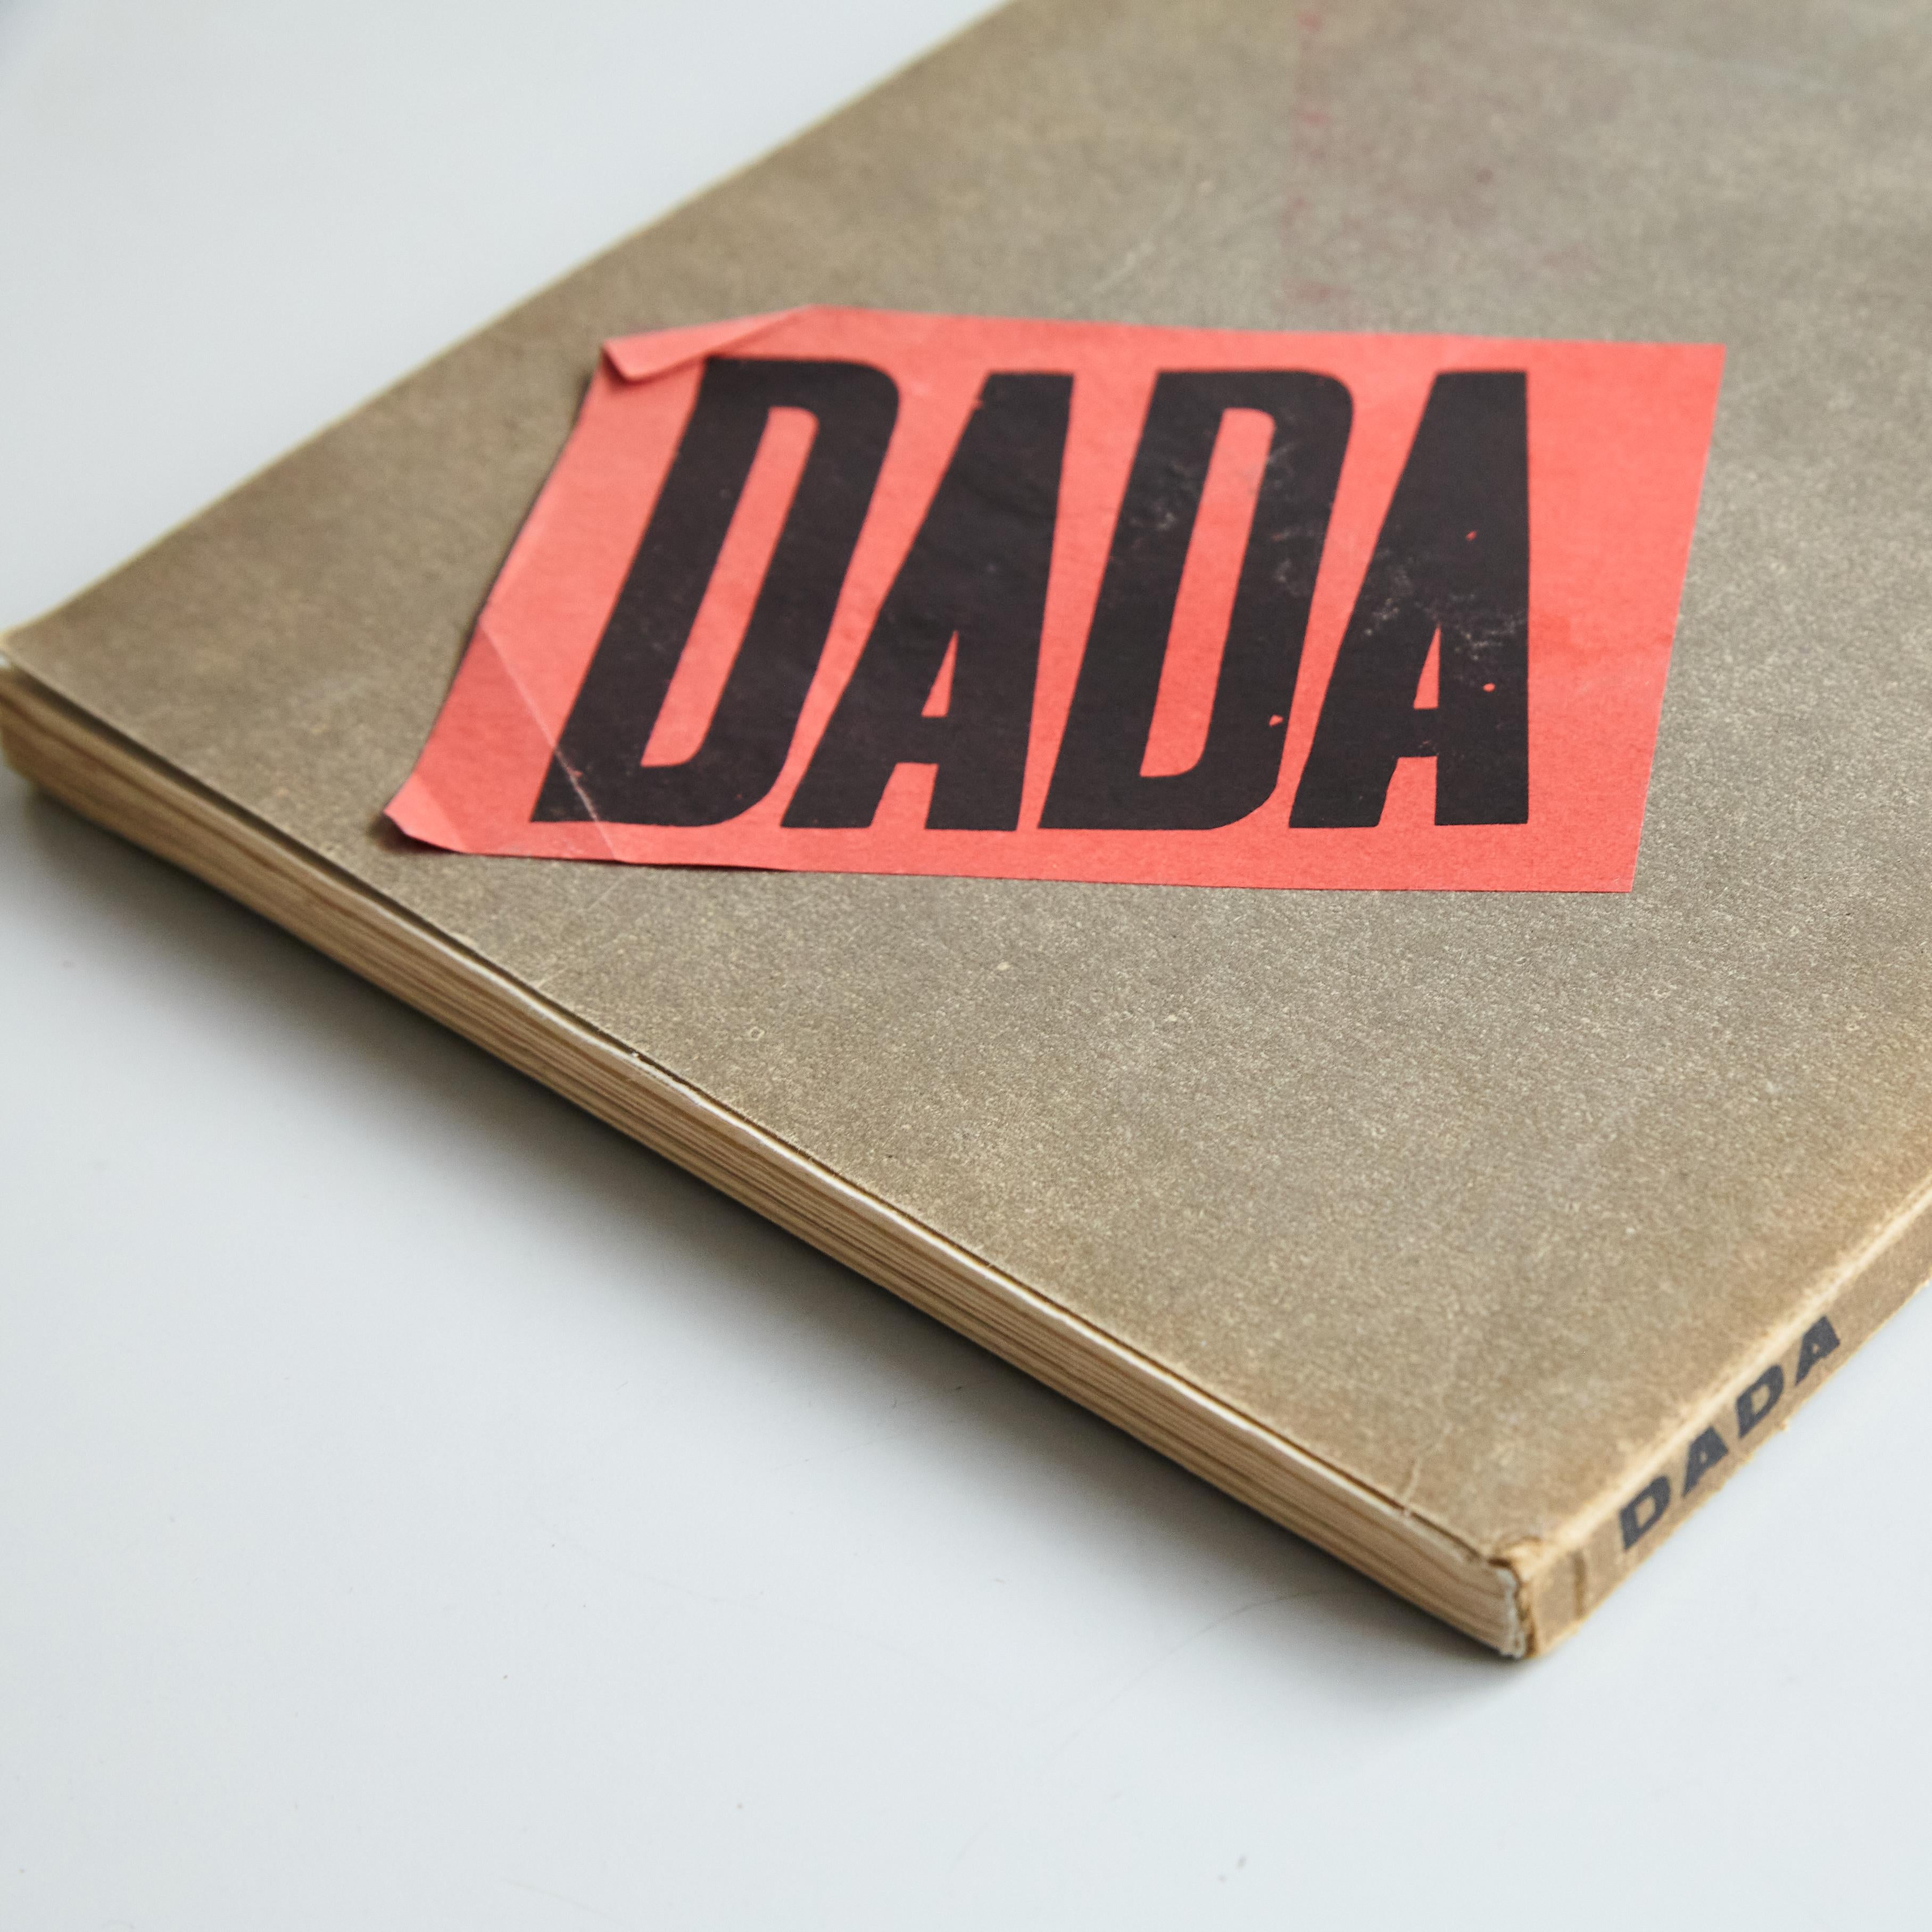 'DADA: Documenting a Movement' original title 'DADA: Dokumente einer Bewegung' book by various authors.
Published by Art Association for the Rhineland and Westphalia (Germany).

Manufactured in Germany, circa 1958.

In good original condition, with